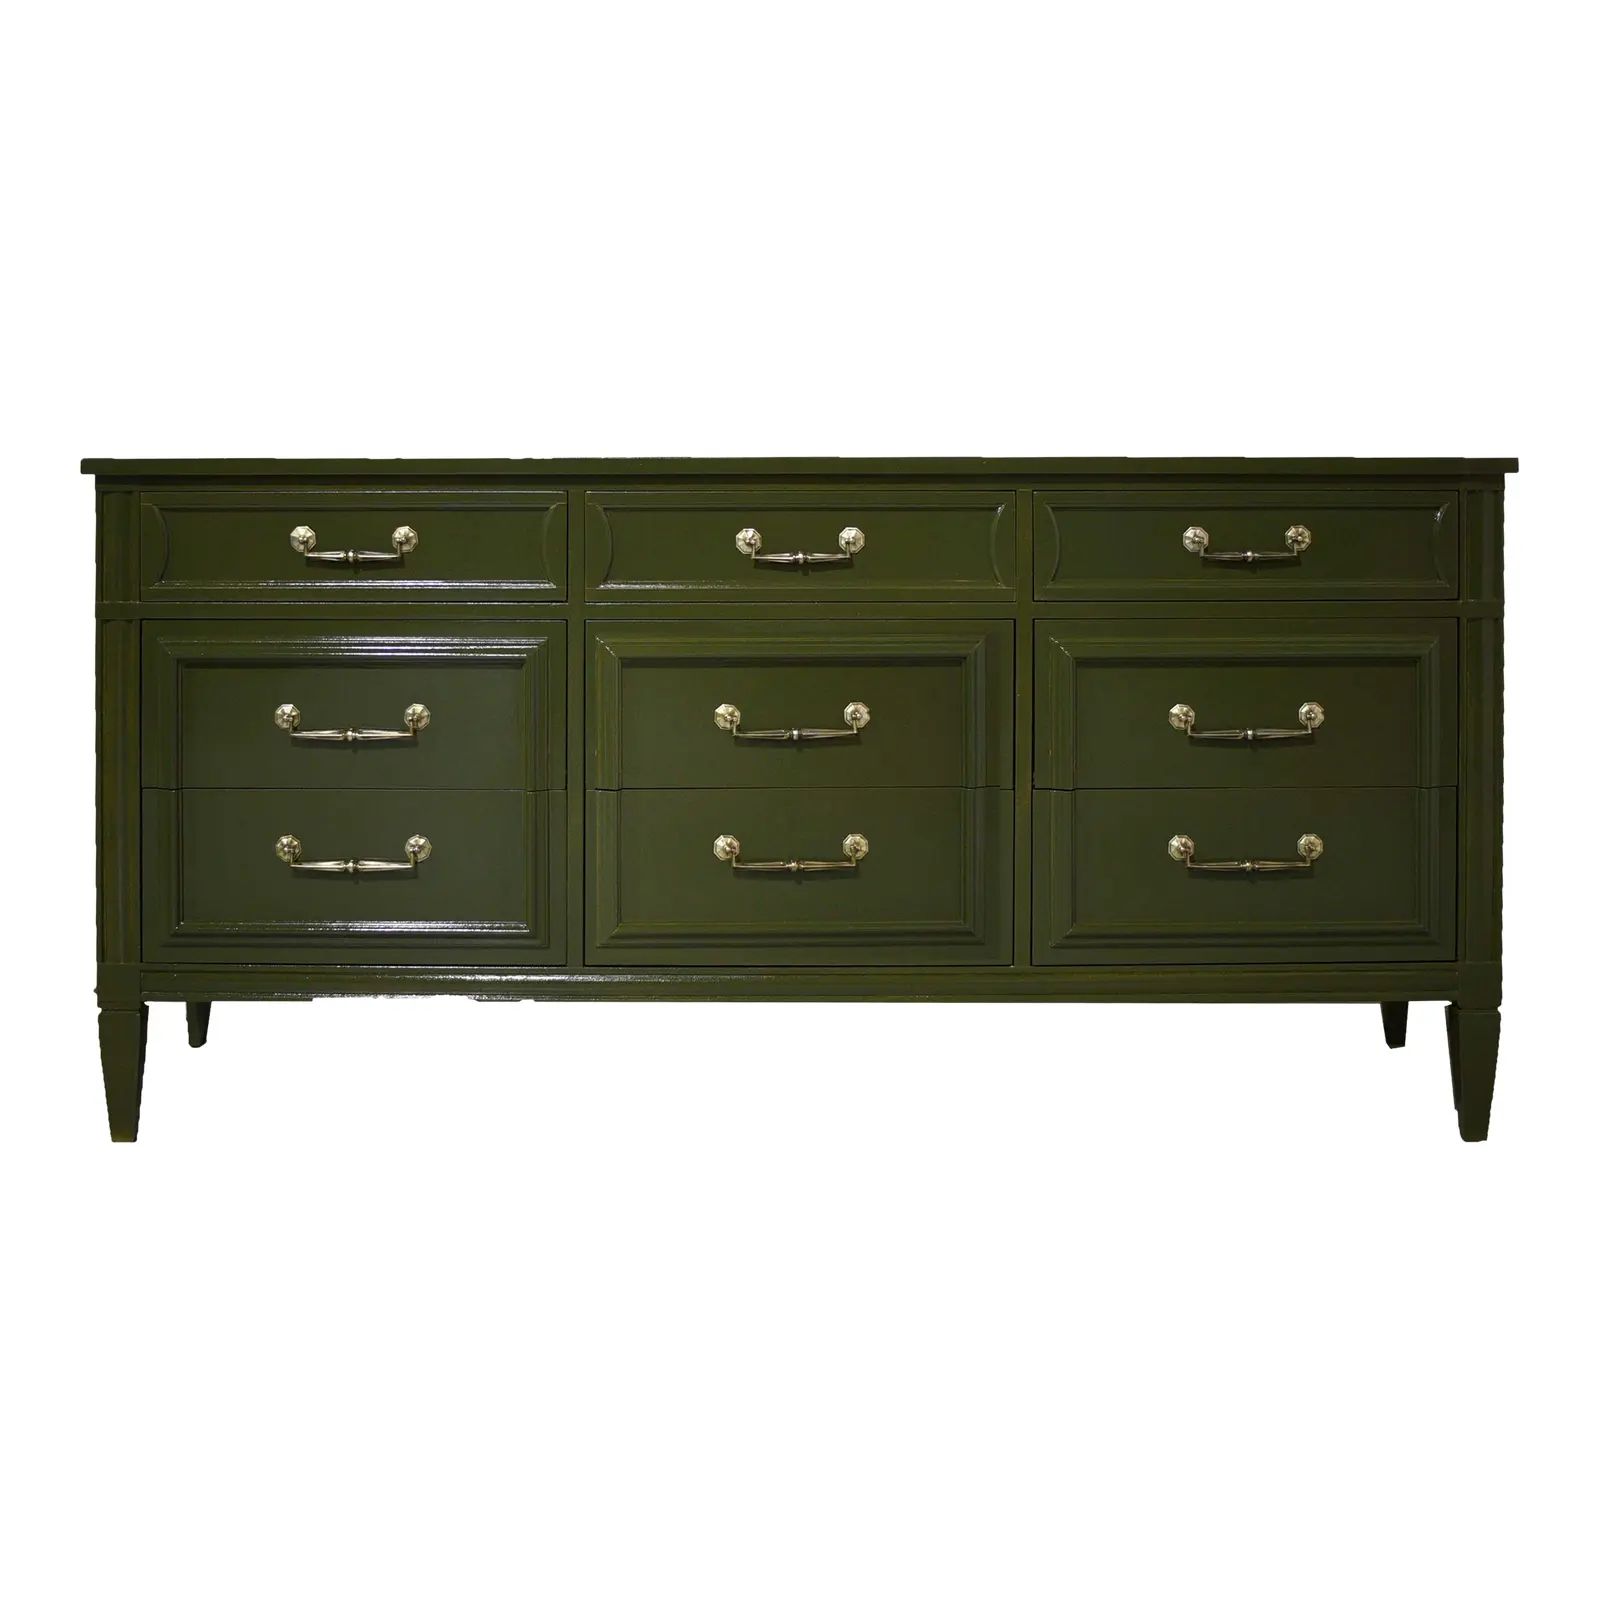 Mid Century Transitional 9 Drawer Dresser in Olive Green by National Mount Airy - Newly Painted | Chairish